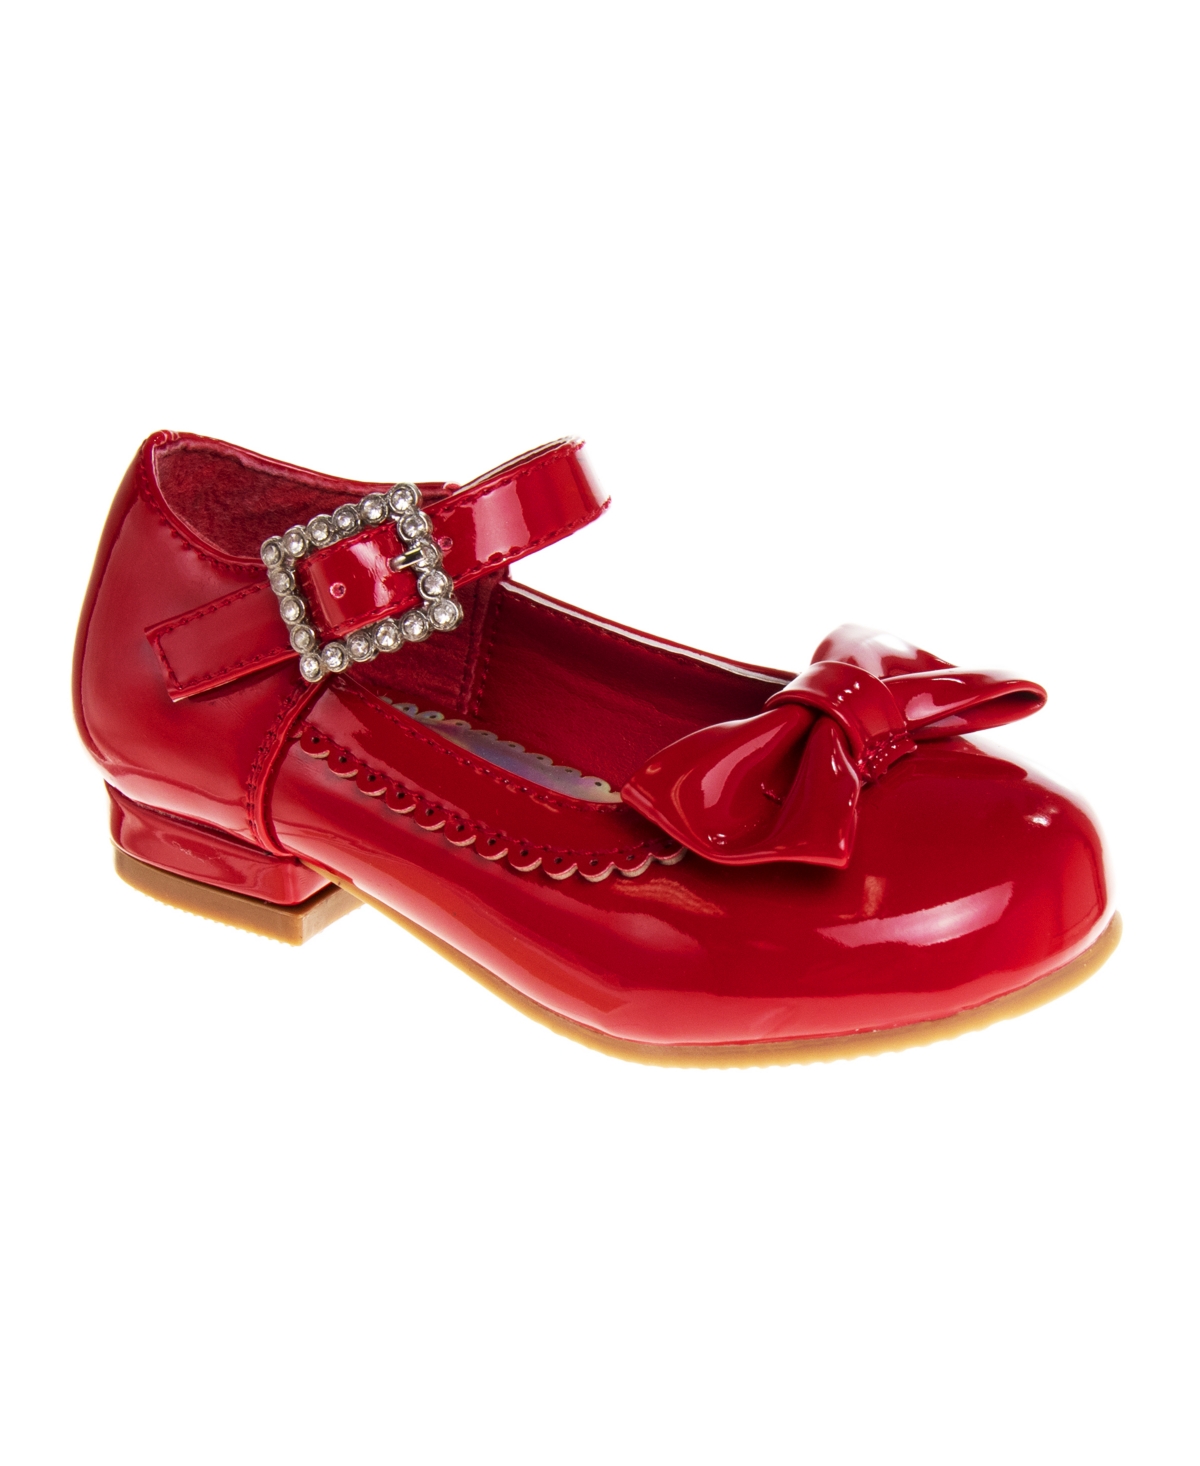 Josmo Kids' Little Girls Bow Detail Low Heeled Dress Shoes In Red Patent